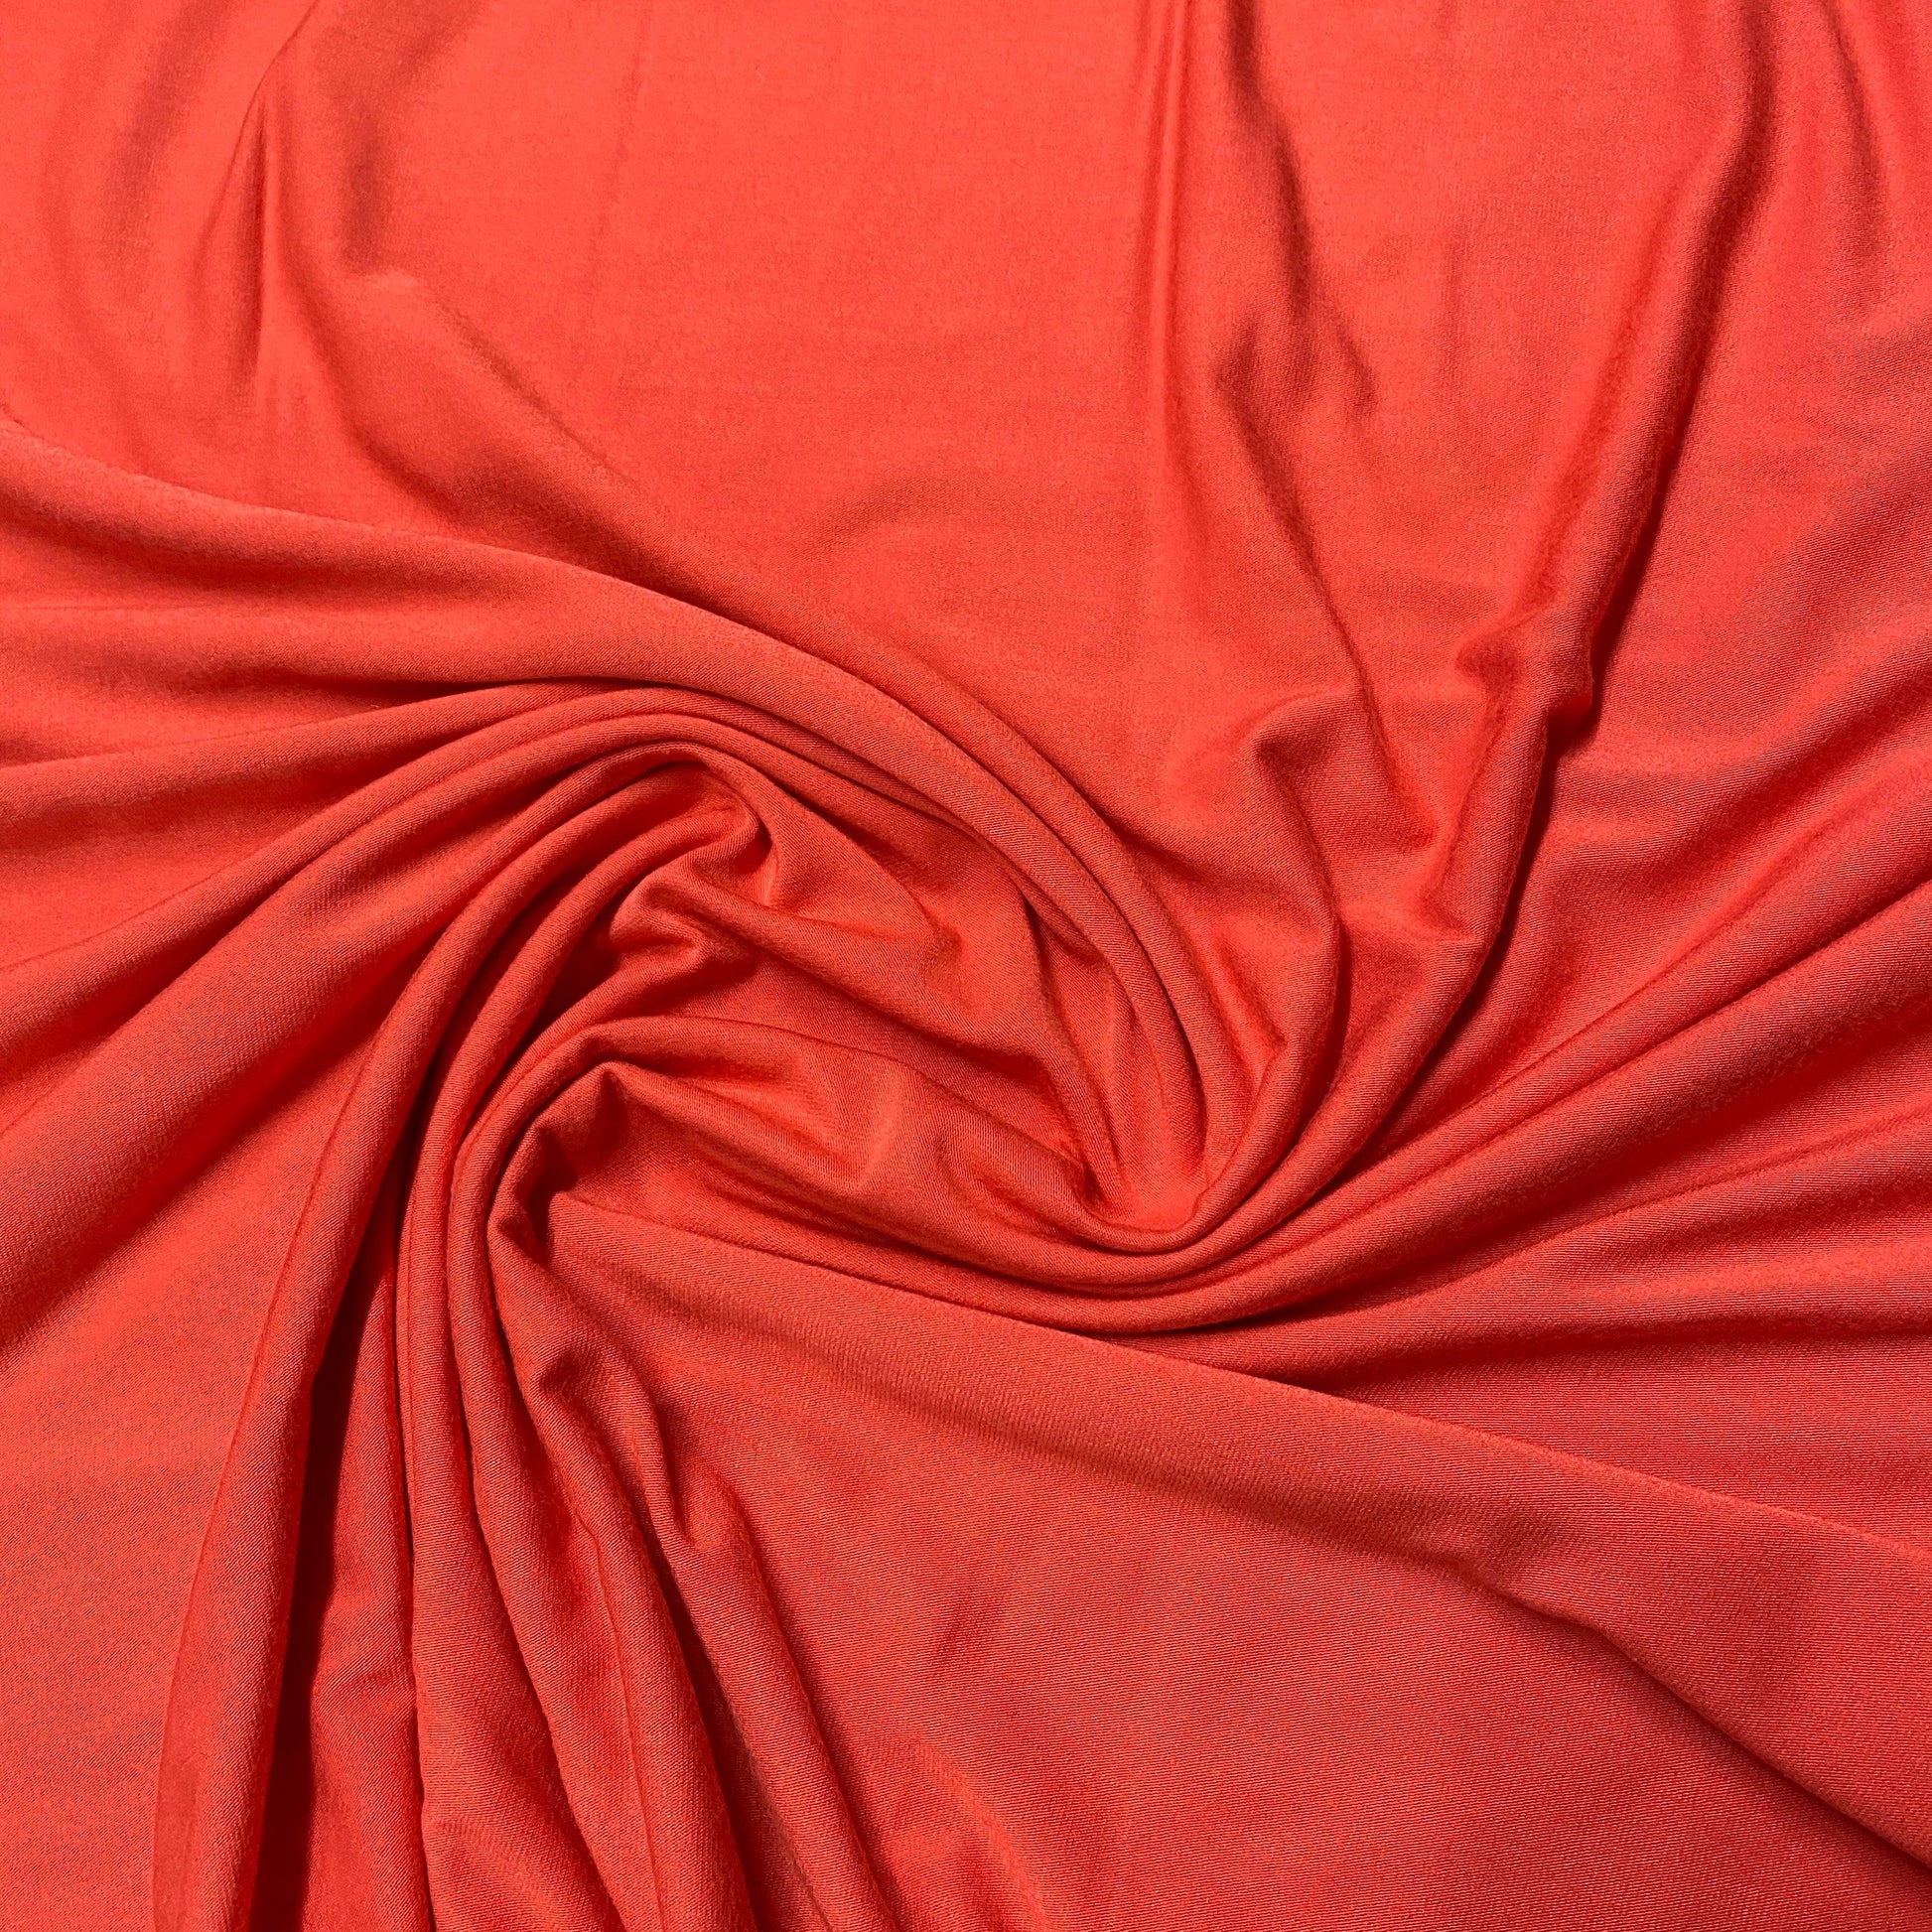 Coral Bamboo/Spandex Jersey Fabric - 250 GSM by Telio - Nature's Fabrics